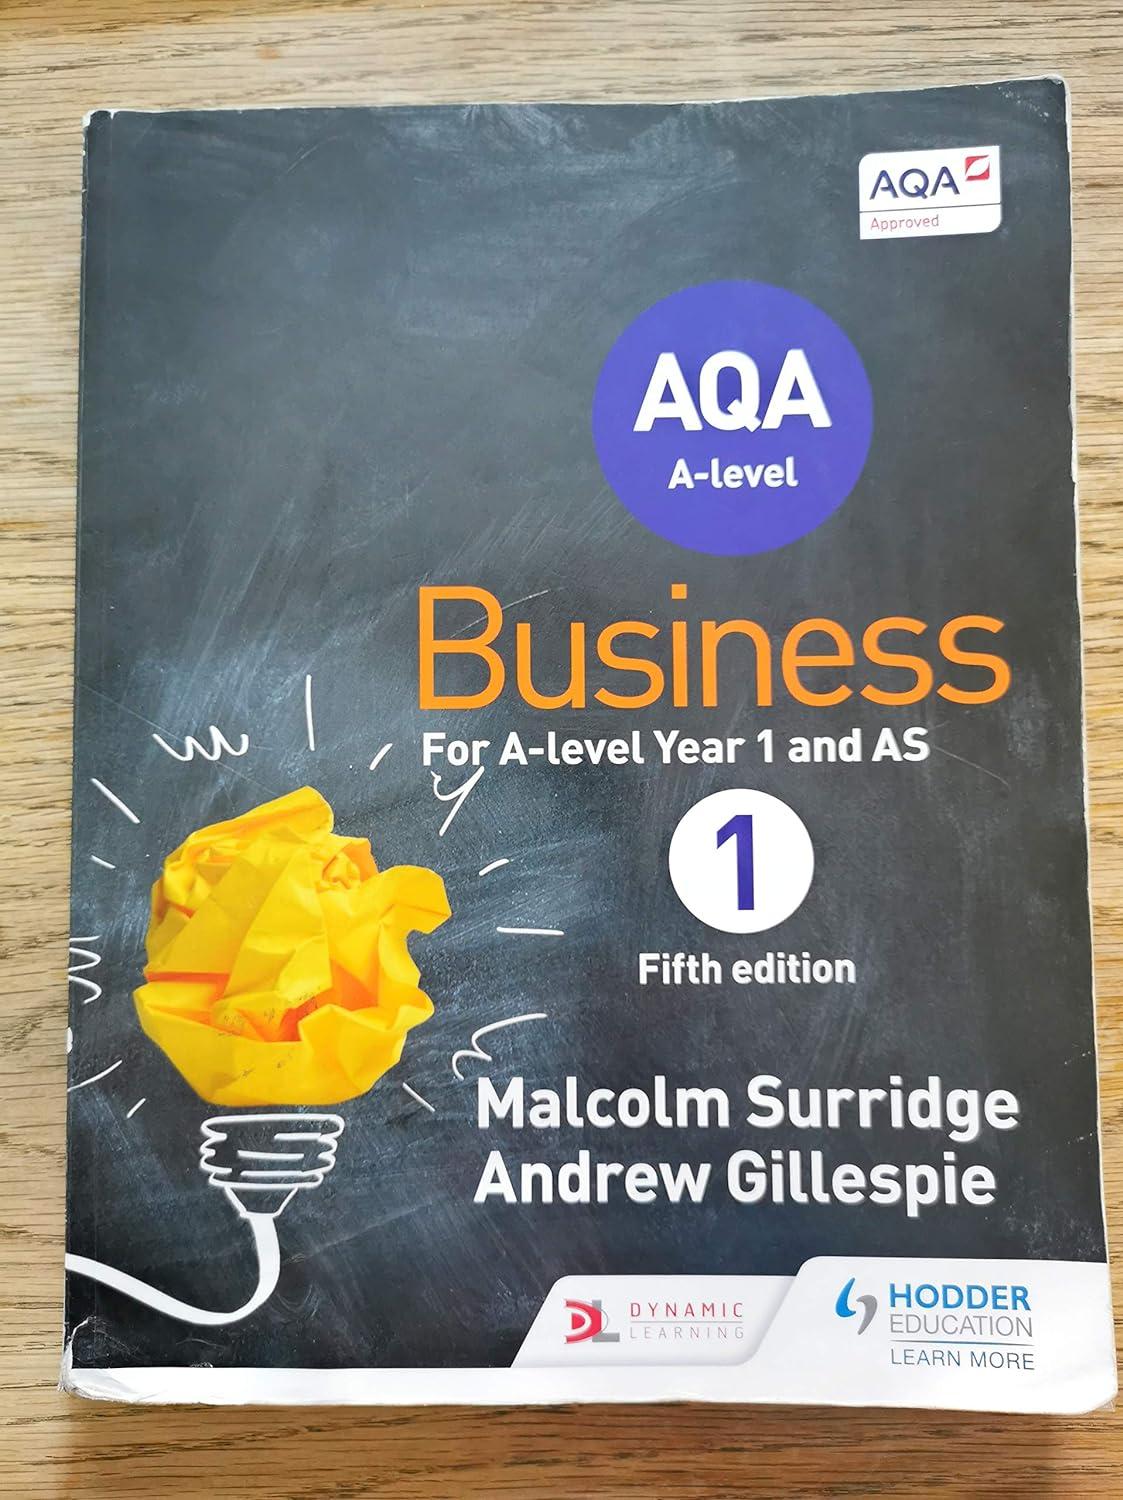 aqa business for a level year 1 and as 5th edition malcolm surridge, andrew gillespie 1471836134,